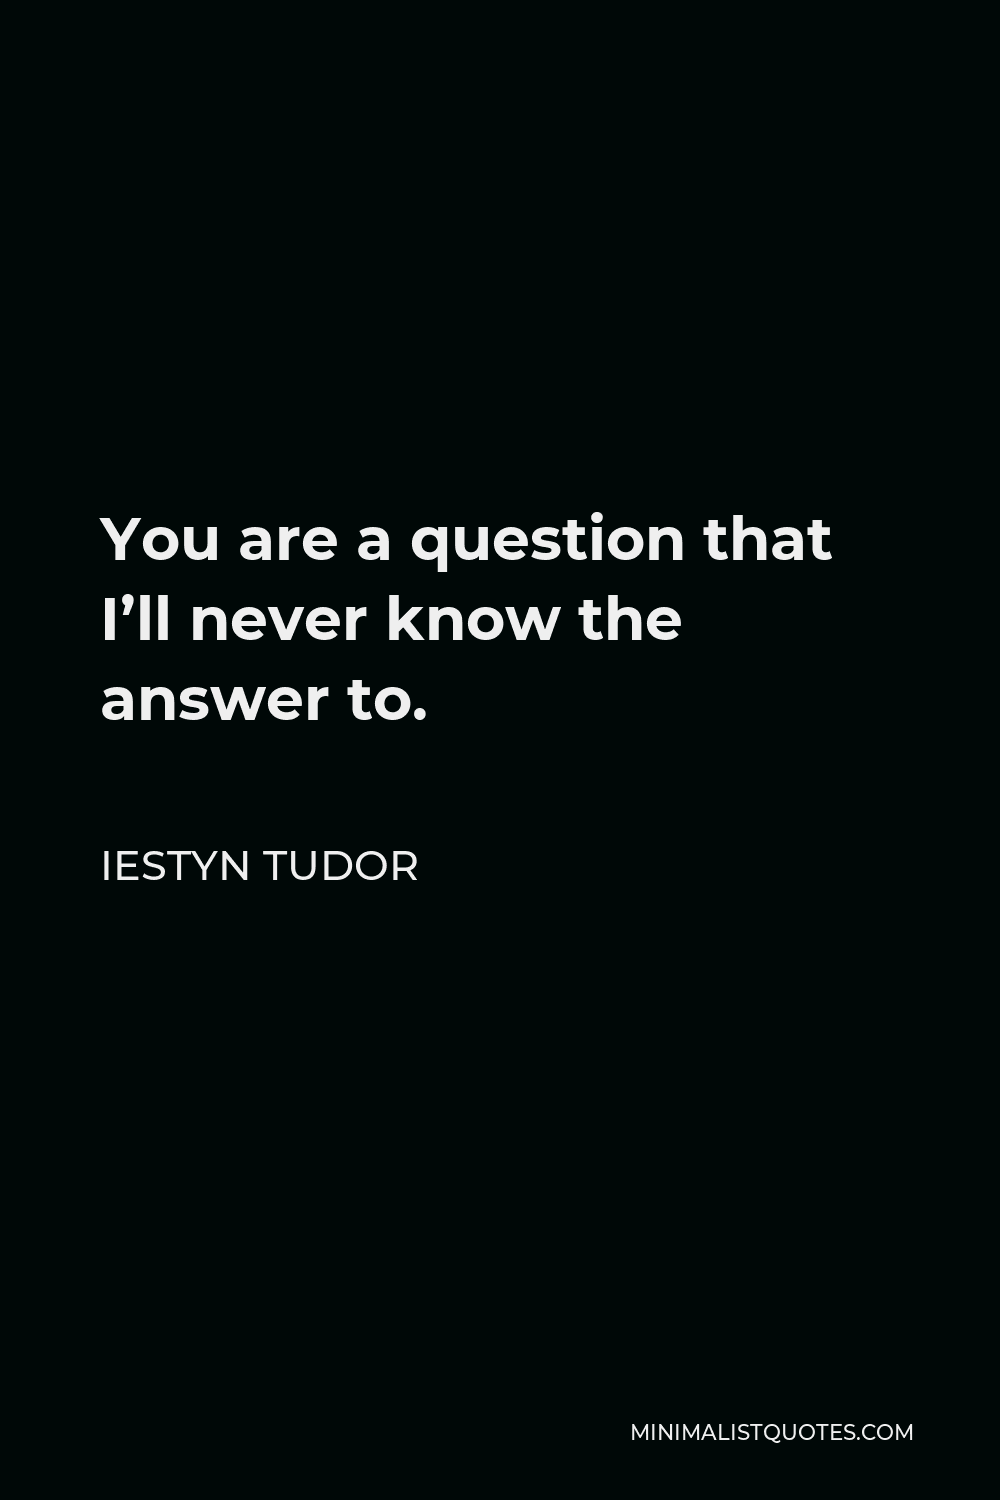 Iestyn Tudor Quote - You are a question that I’ll never know the answer to.